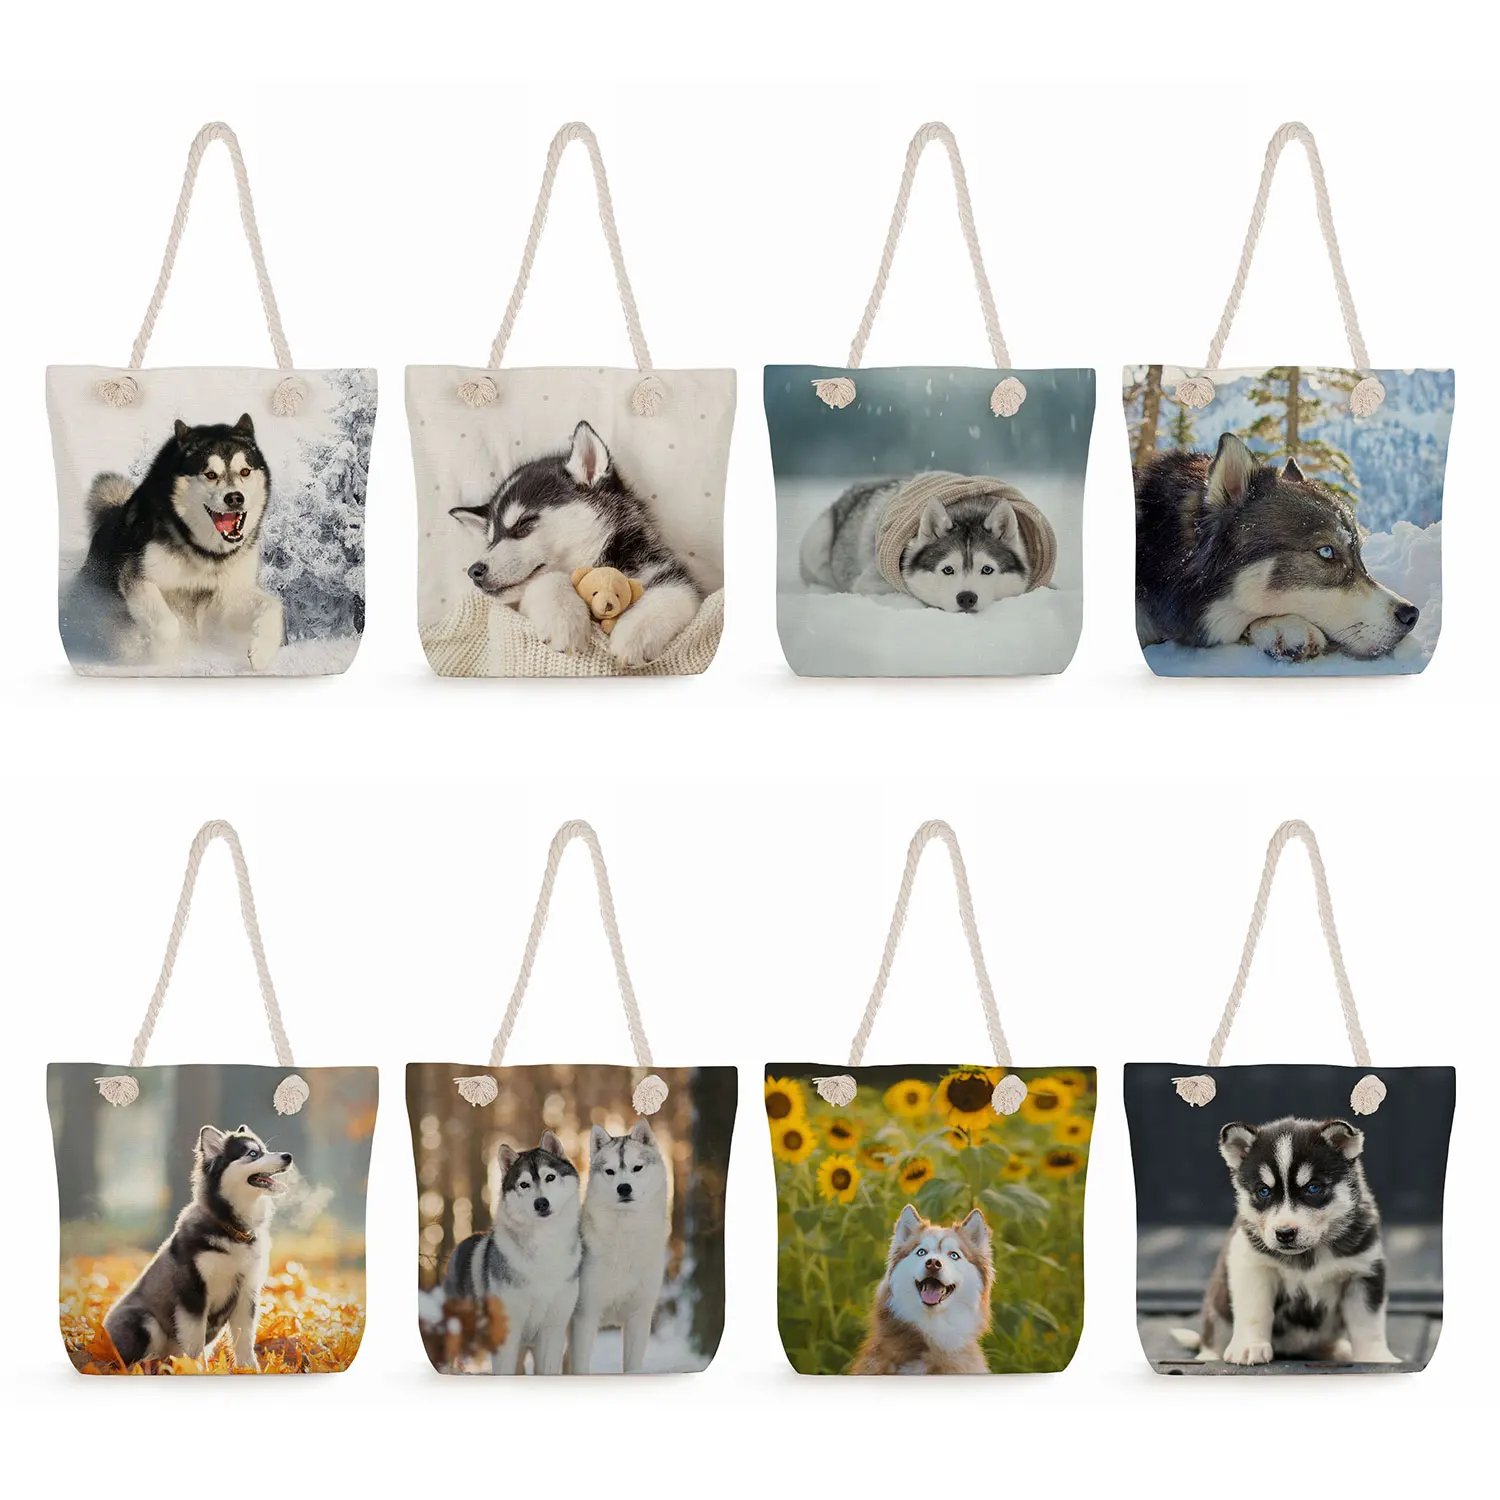 

Cute Siberian Husky Print Handbags Polyester Linen Shopping Totes Dog Graphic Shoulder Bags Thick Rope Travel Beach Bags Women